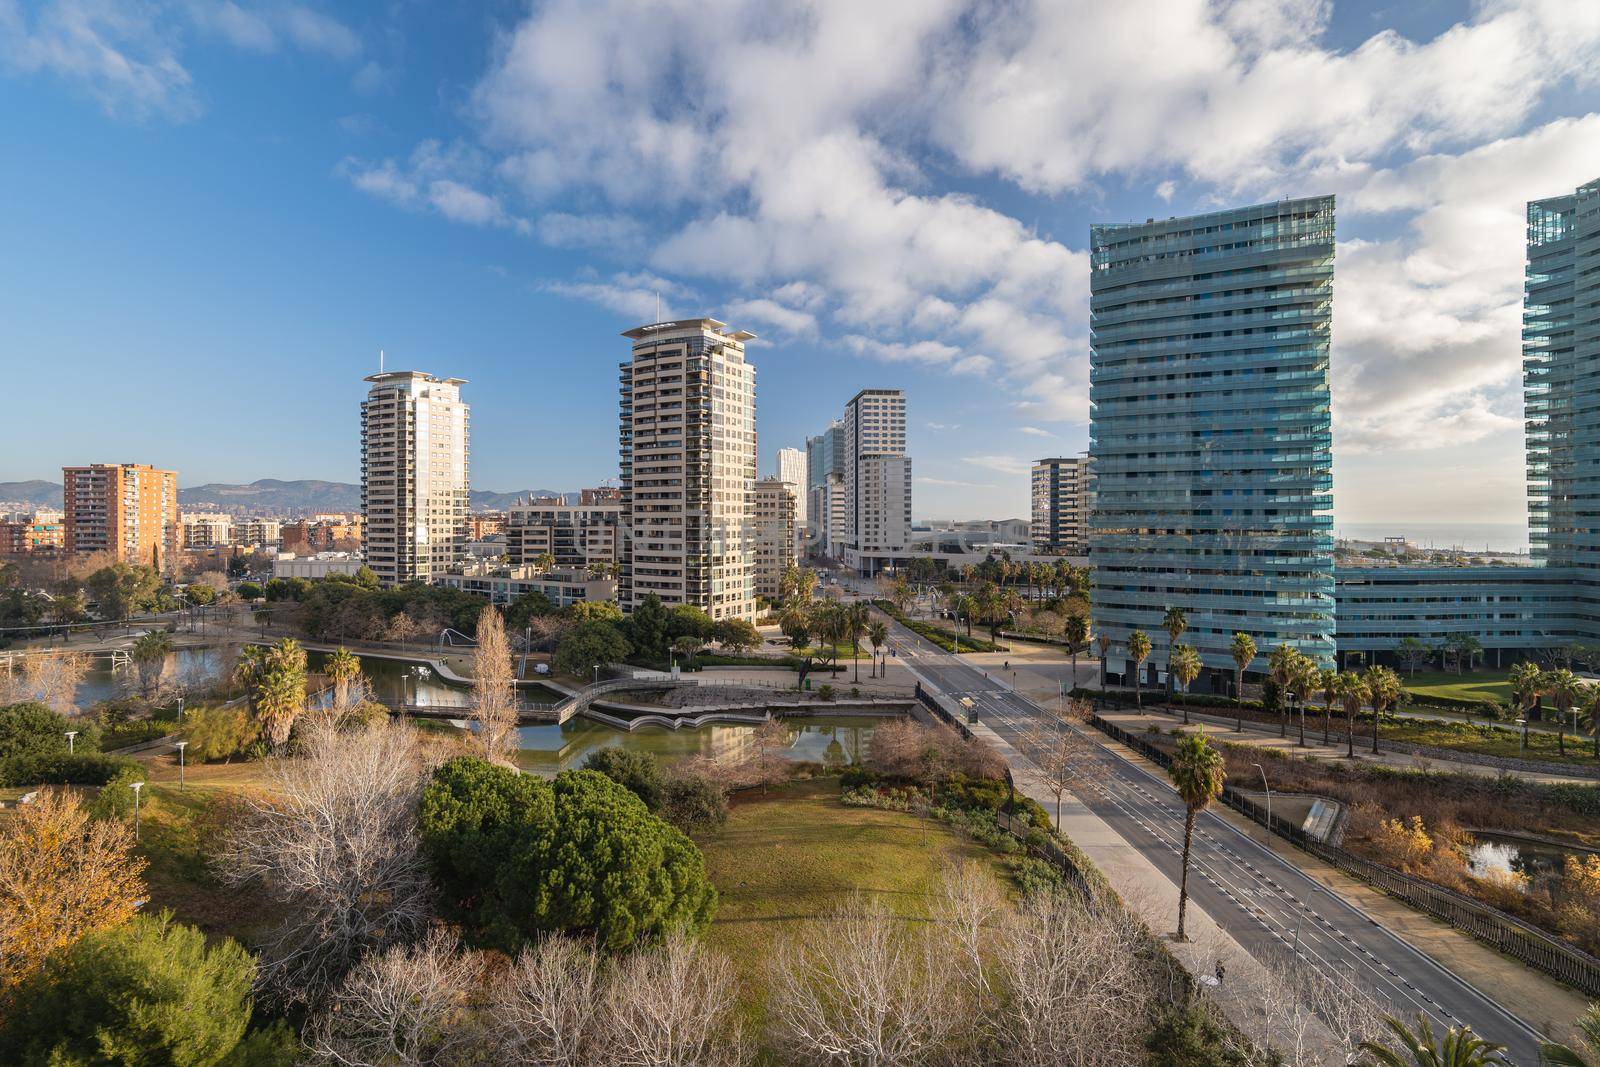 Overview of the Diagonal Mar public park with modern buildings in Barcelona, Catalonia, Spain.